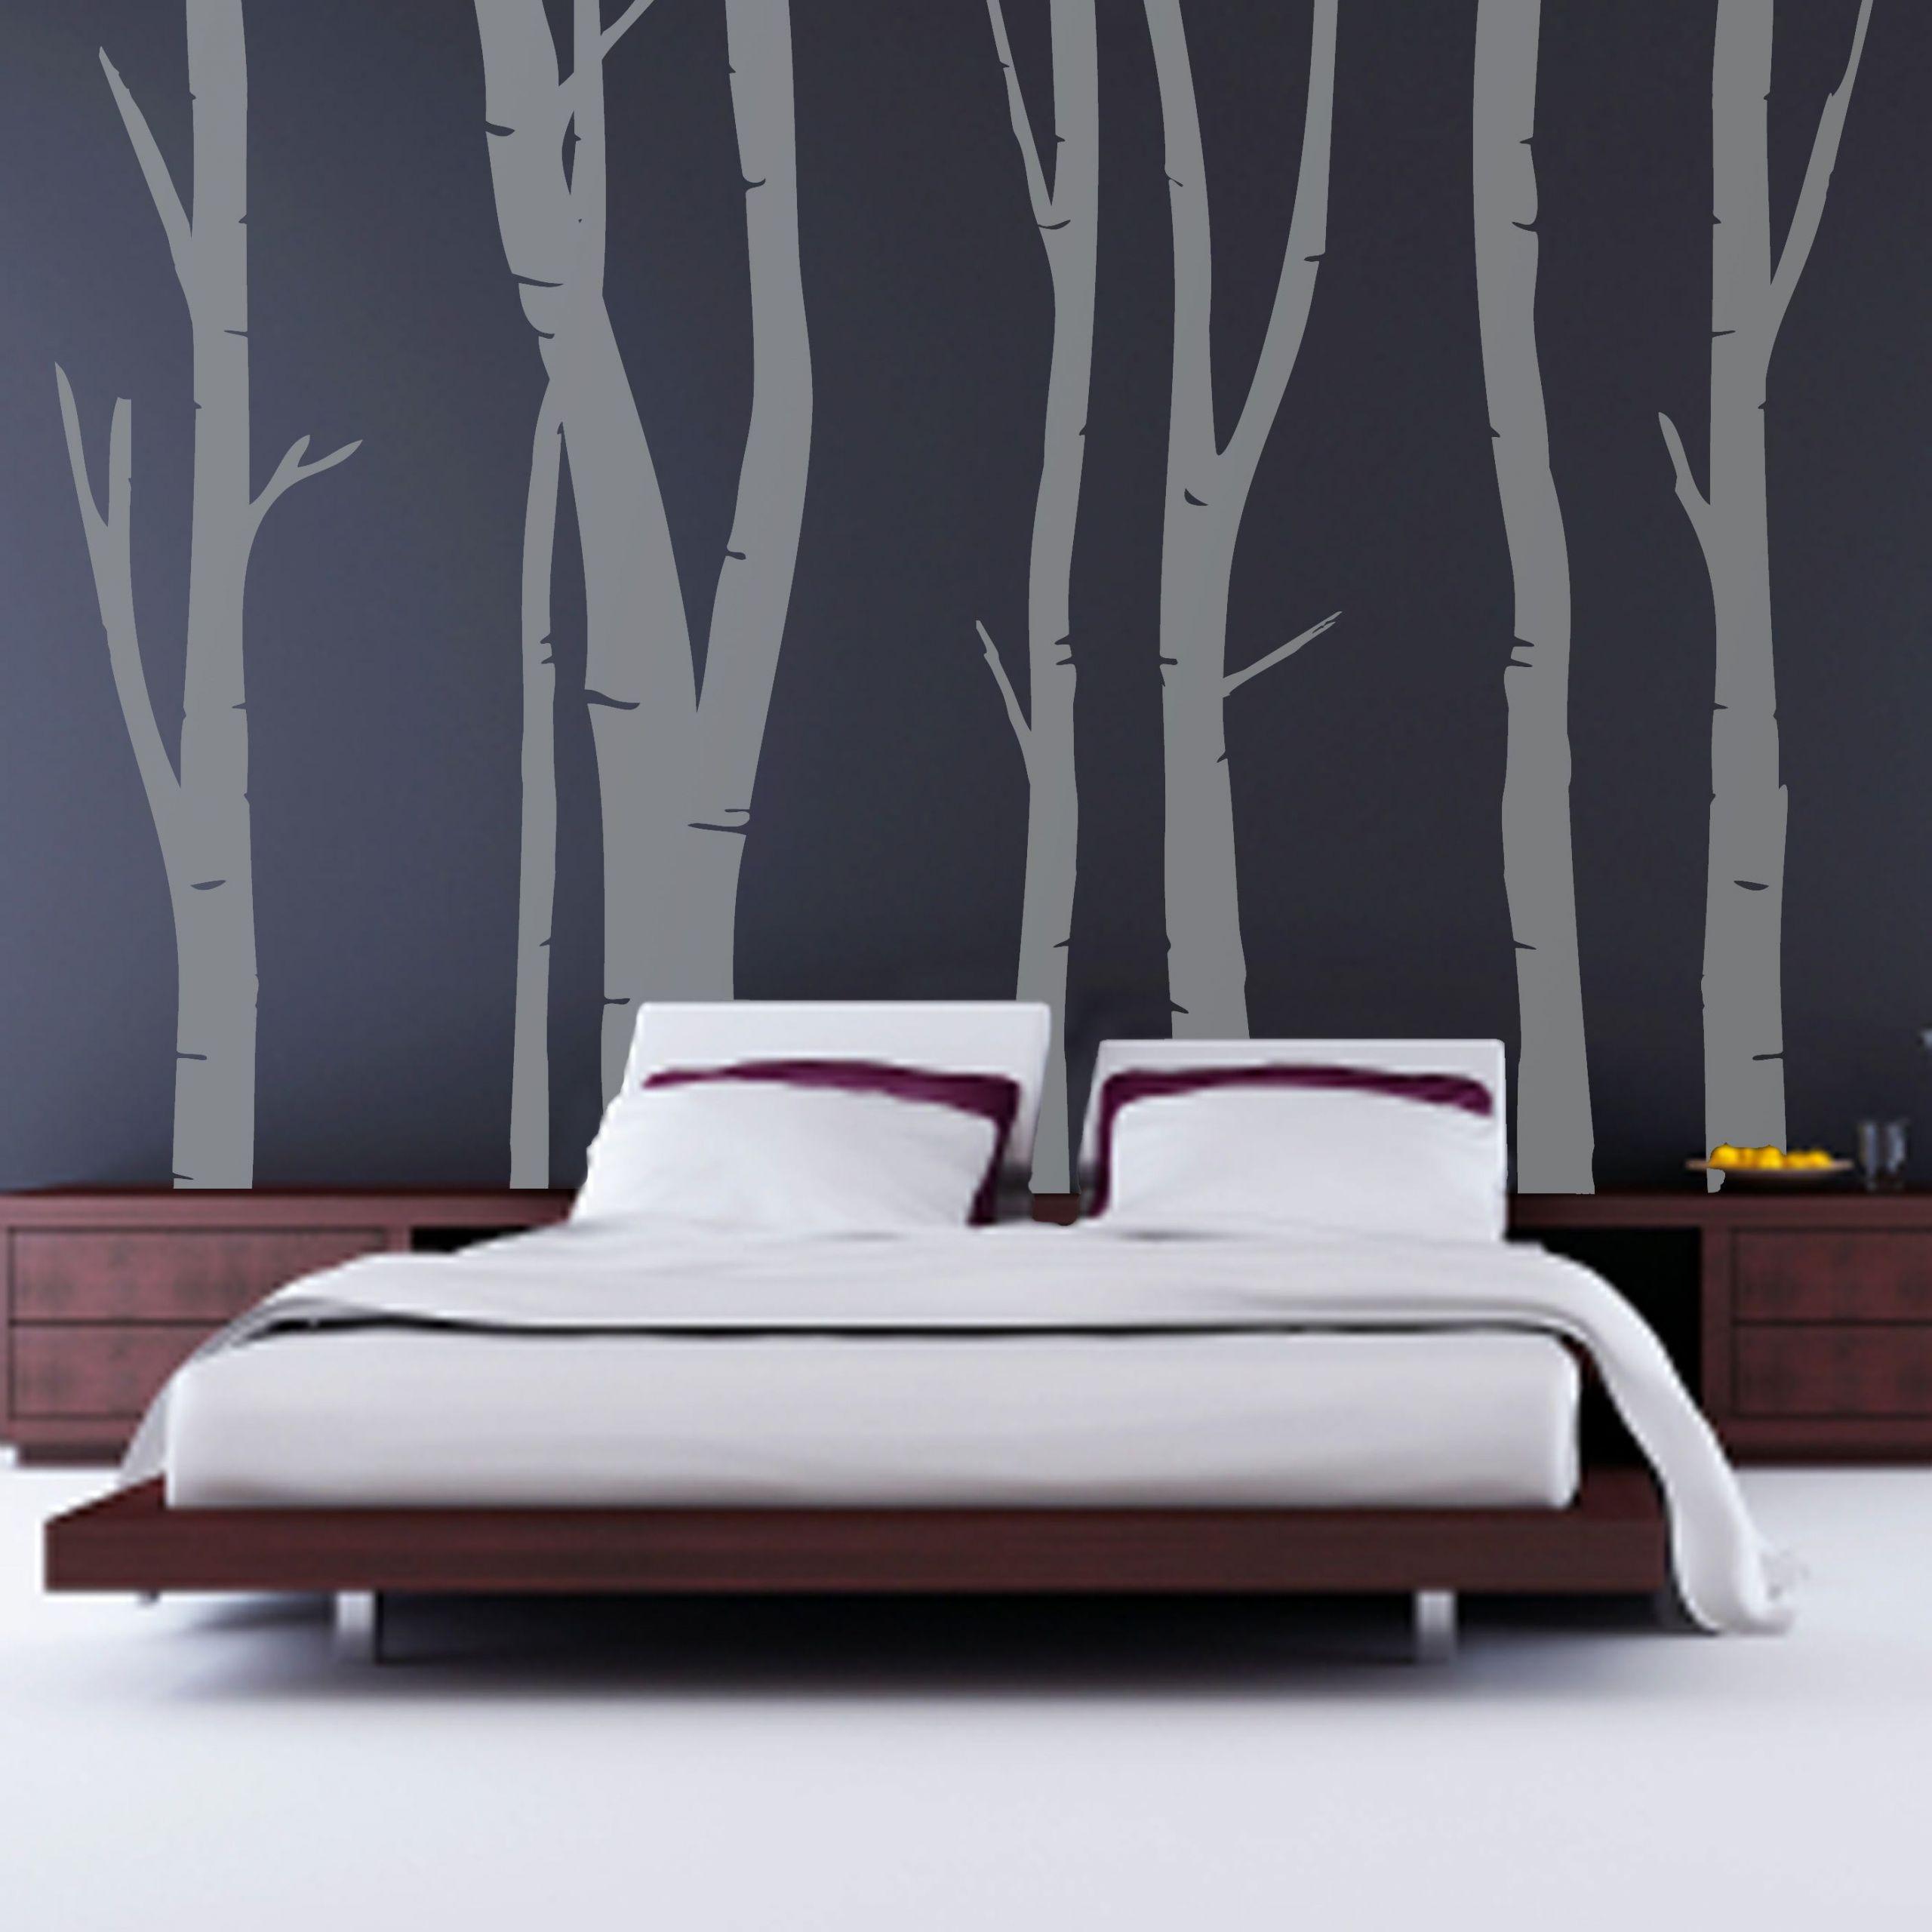 Wall Painting Designs For Bedroom
 The Various Unique Wall Paint Ideas as the Simple DIY Wall